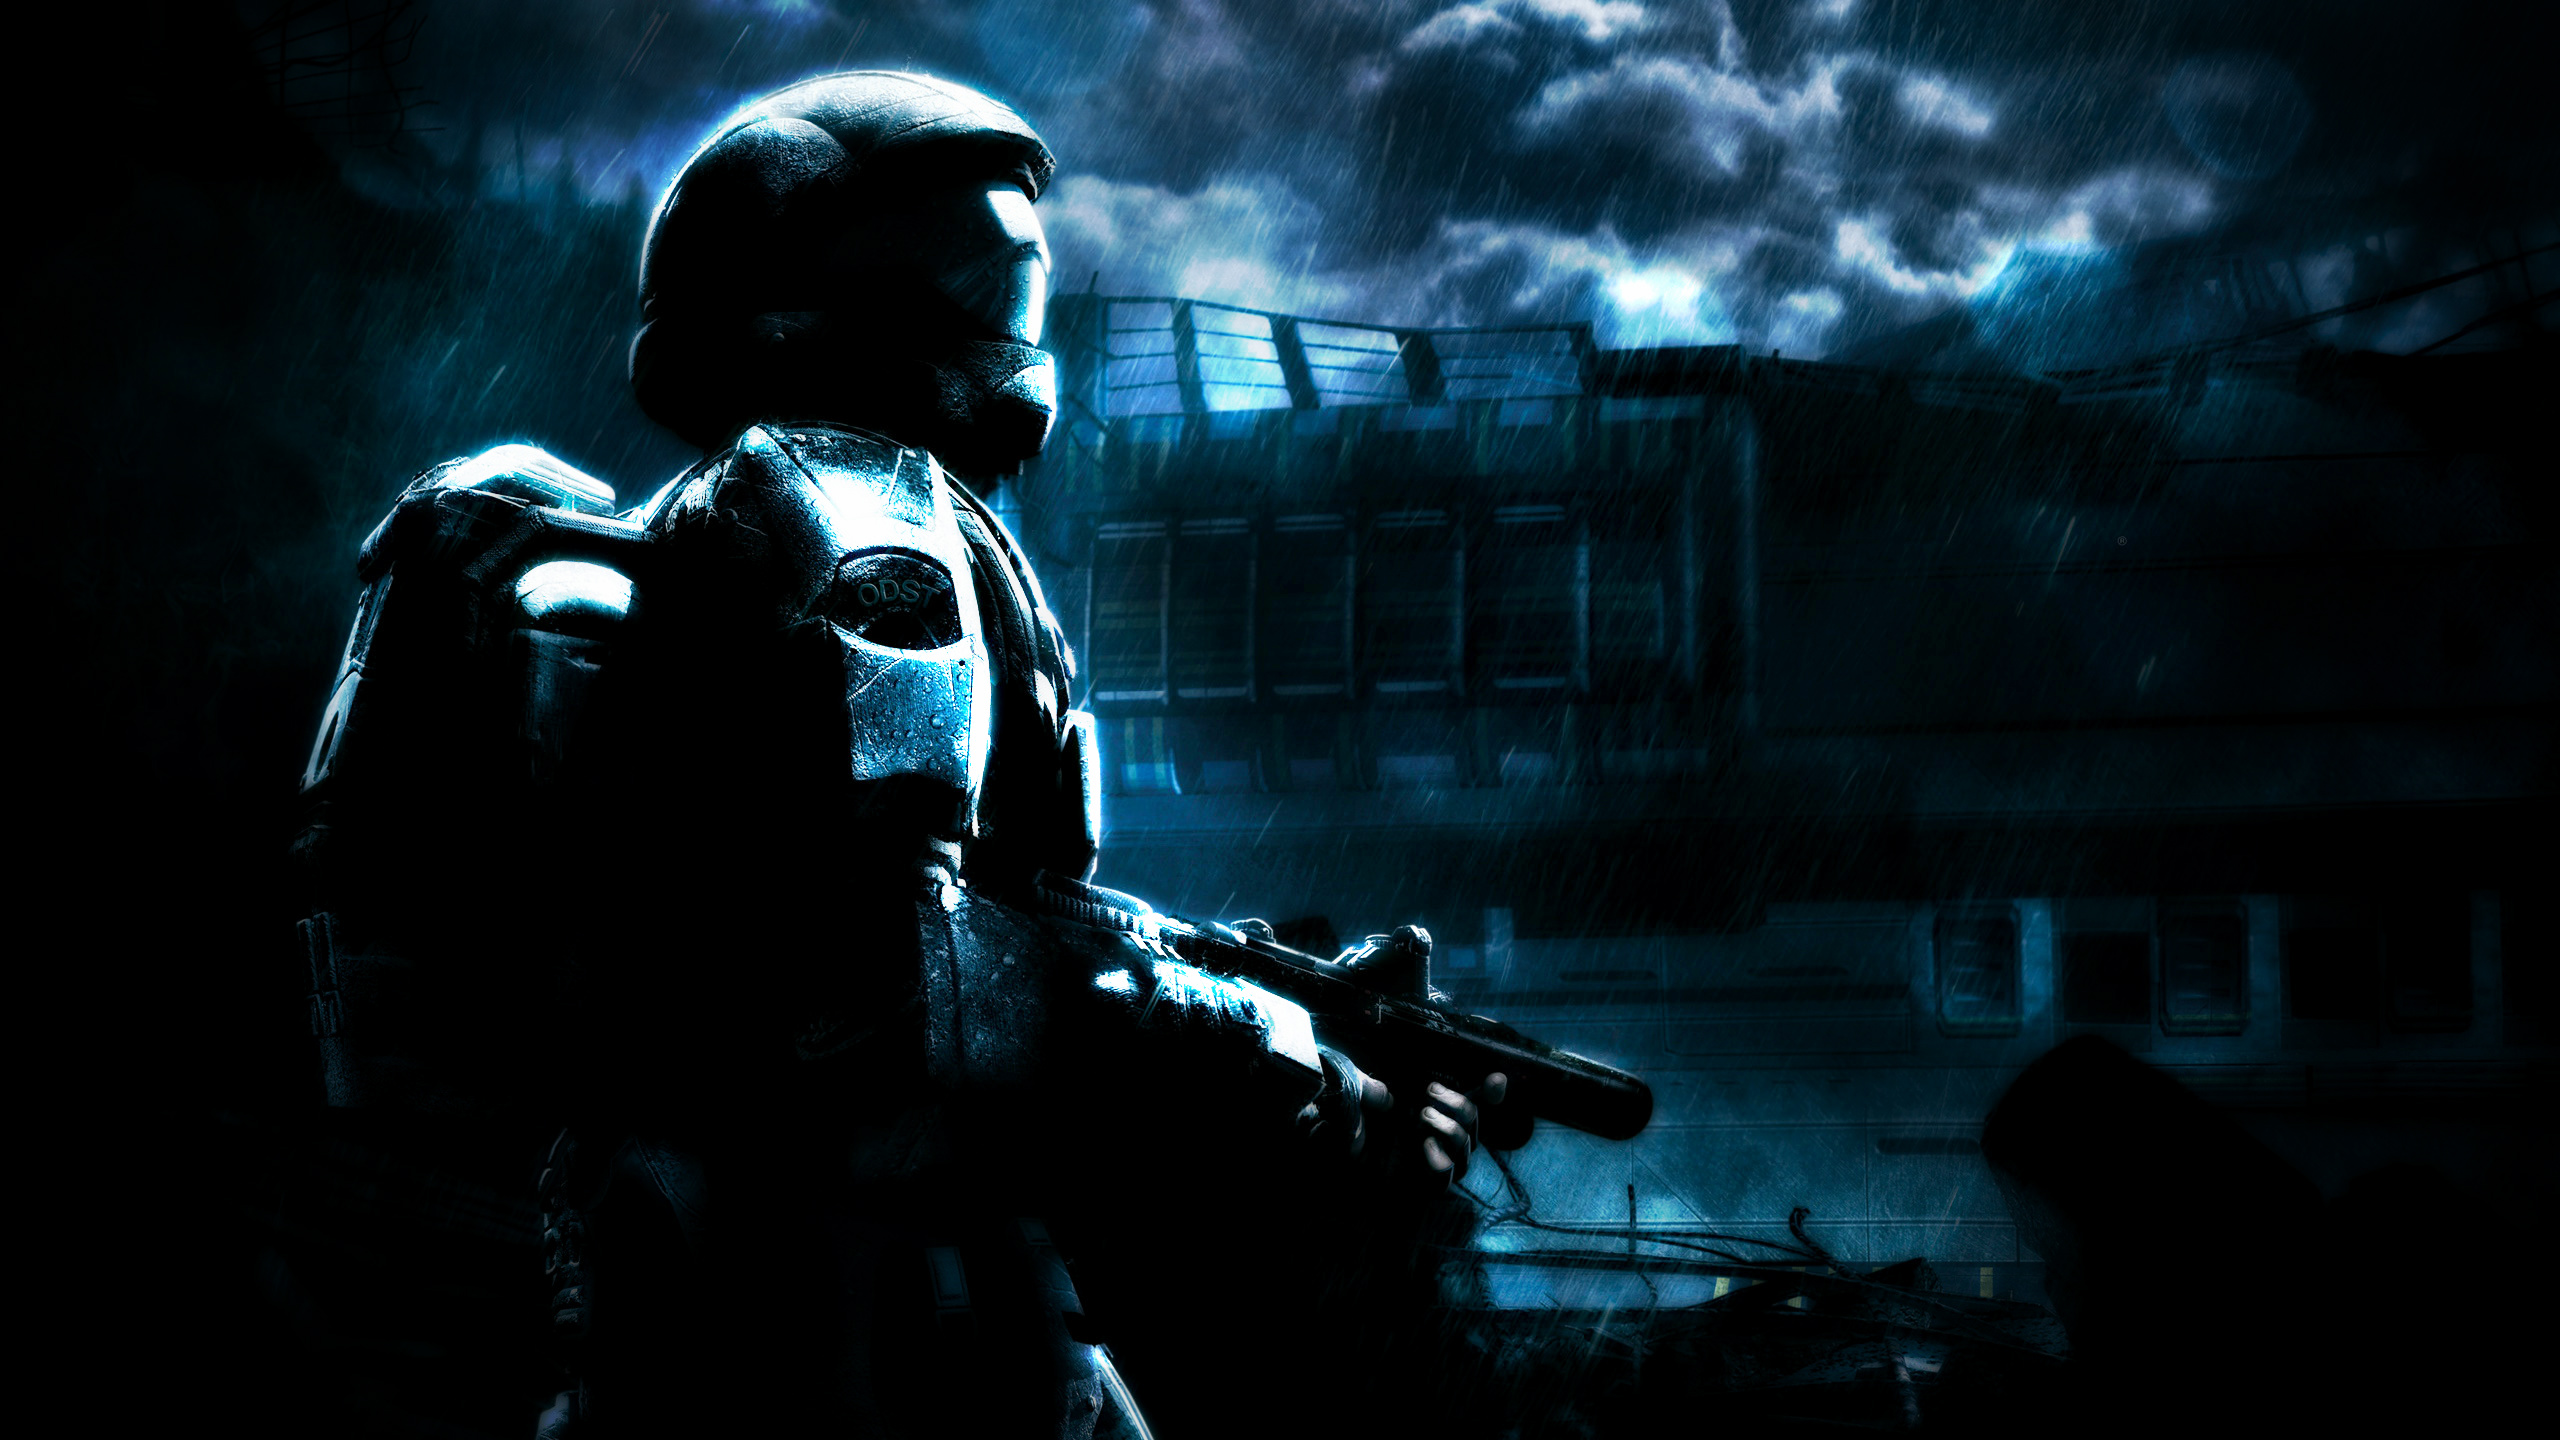 Video Game Halo 3 ODST 2560x1440